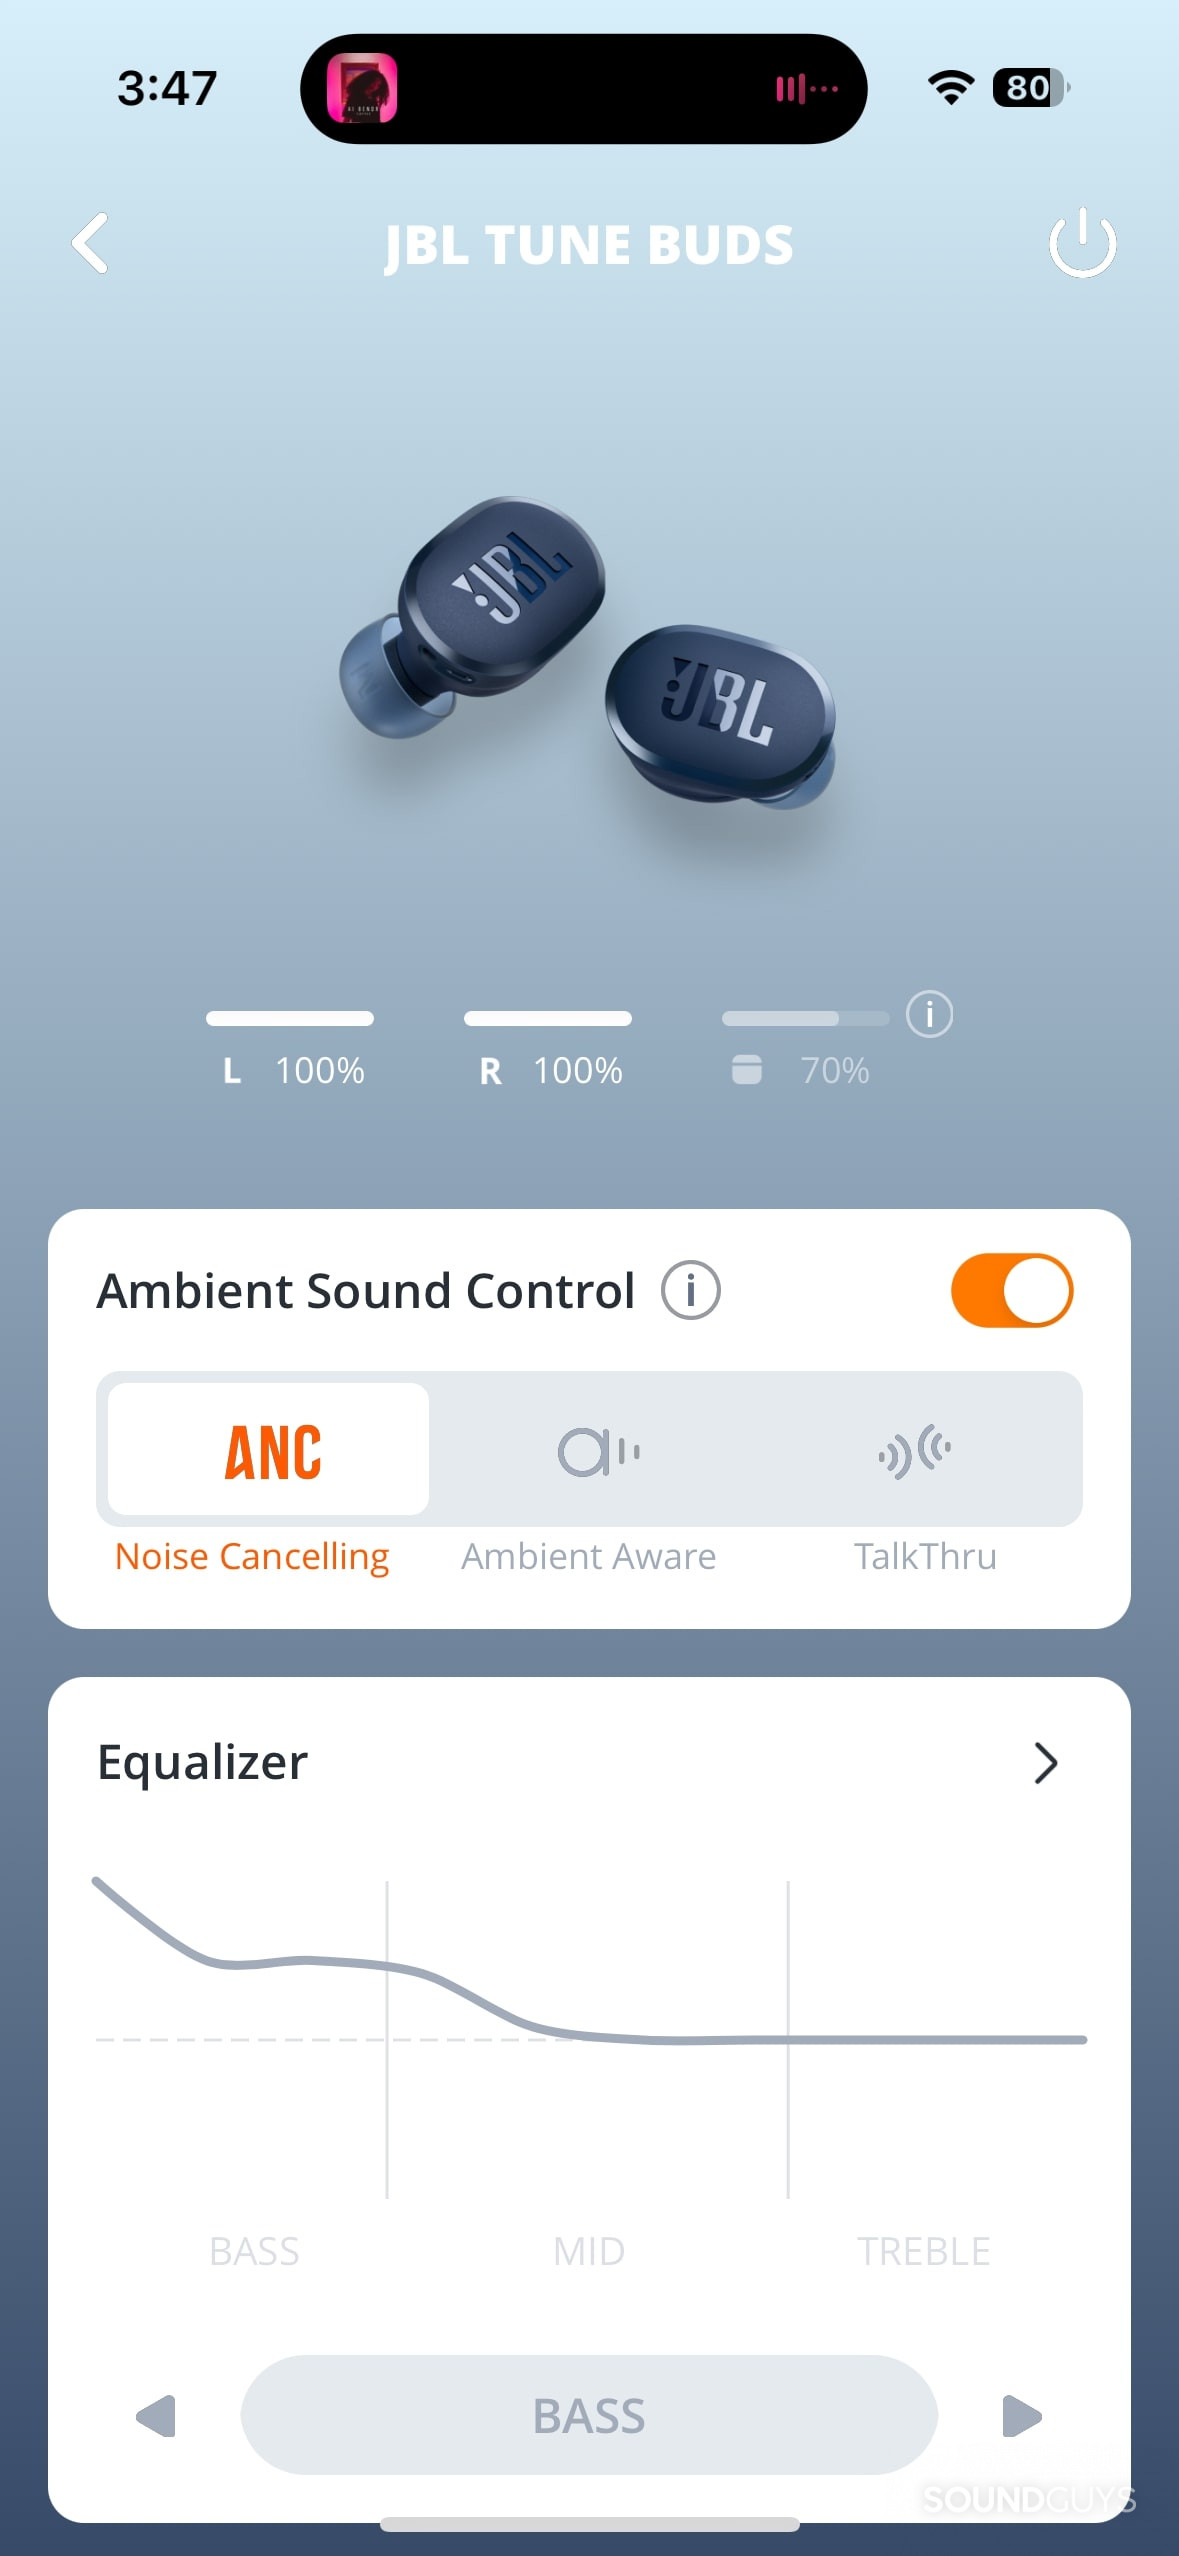 JBL Tune Buds Headphones app home screen with battery information and sound control.